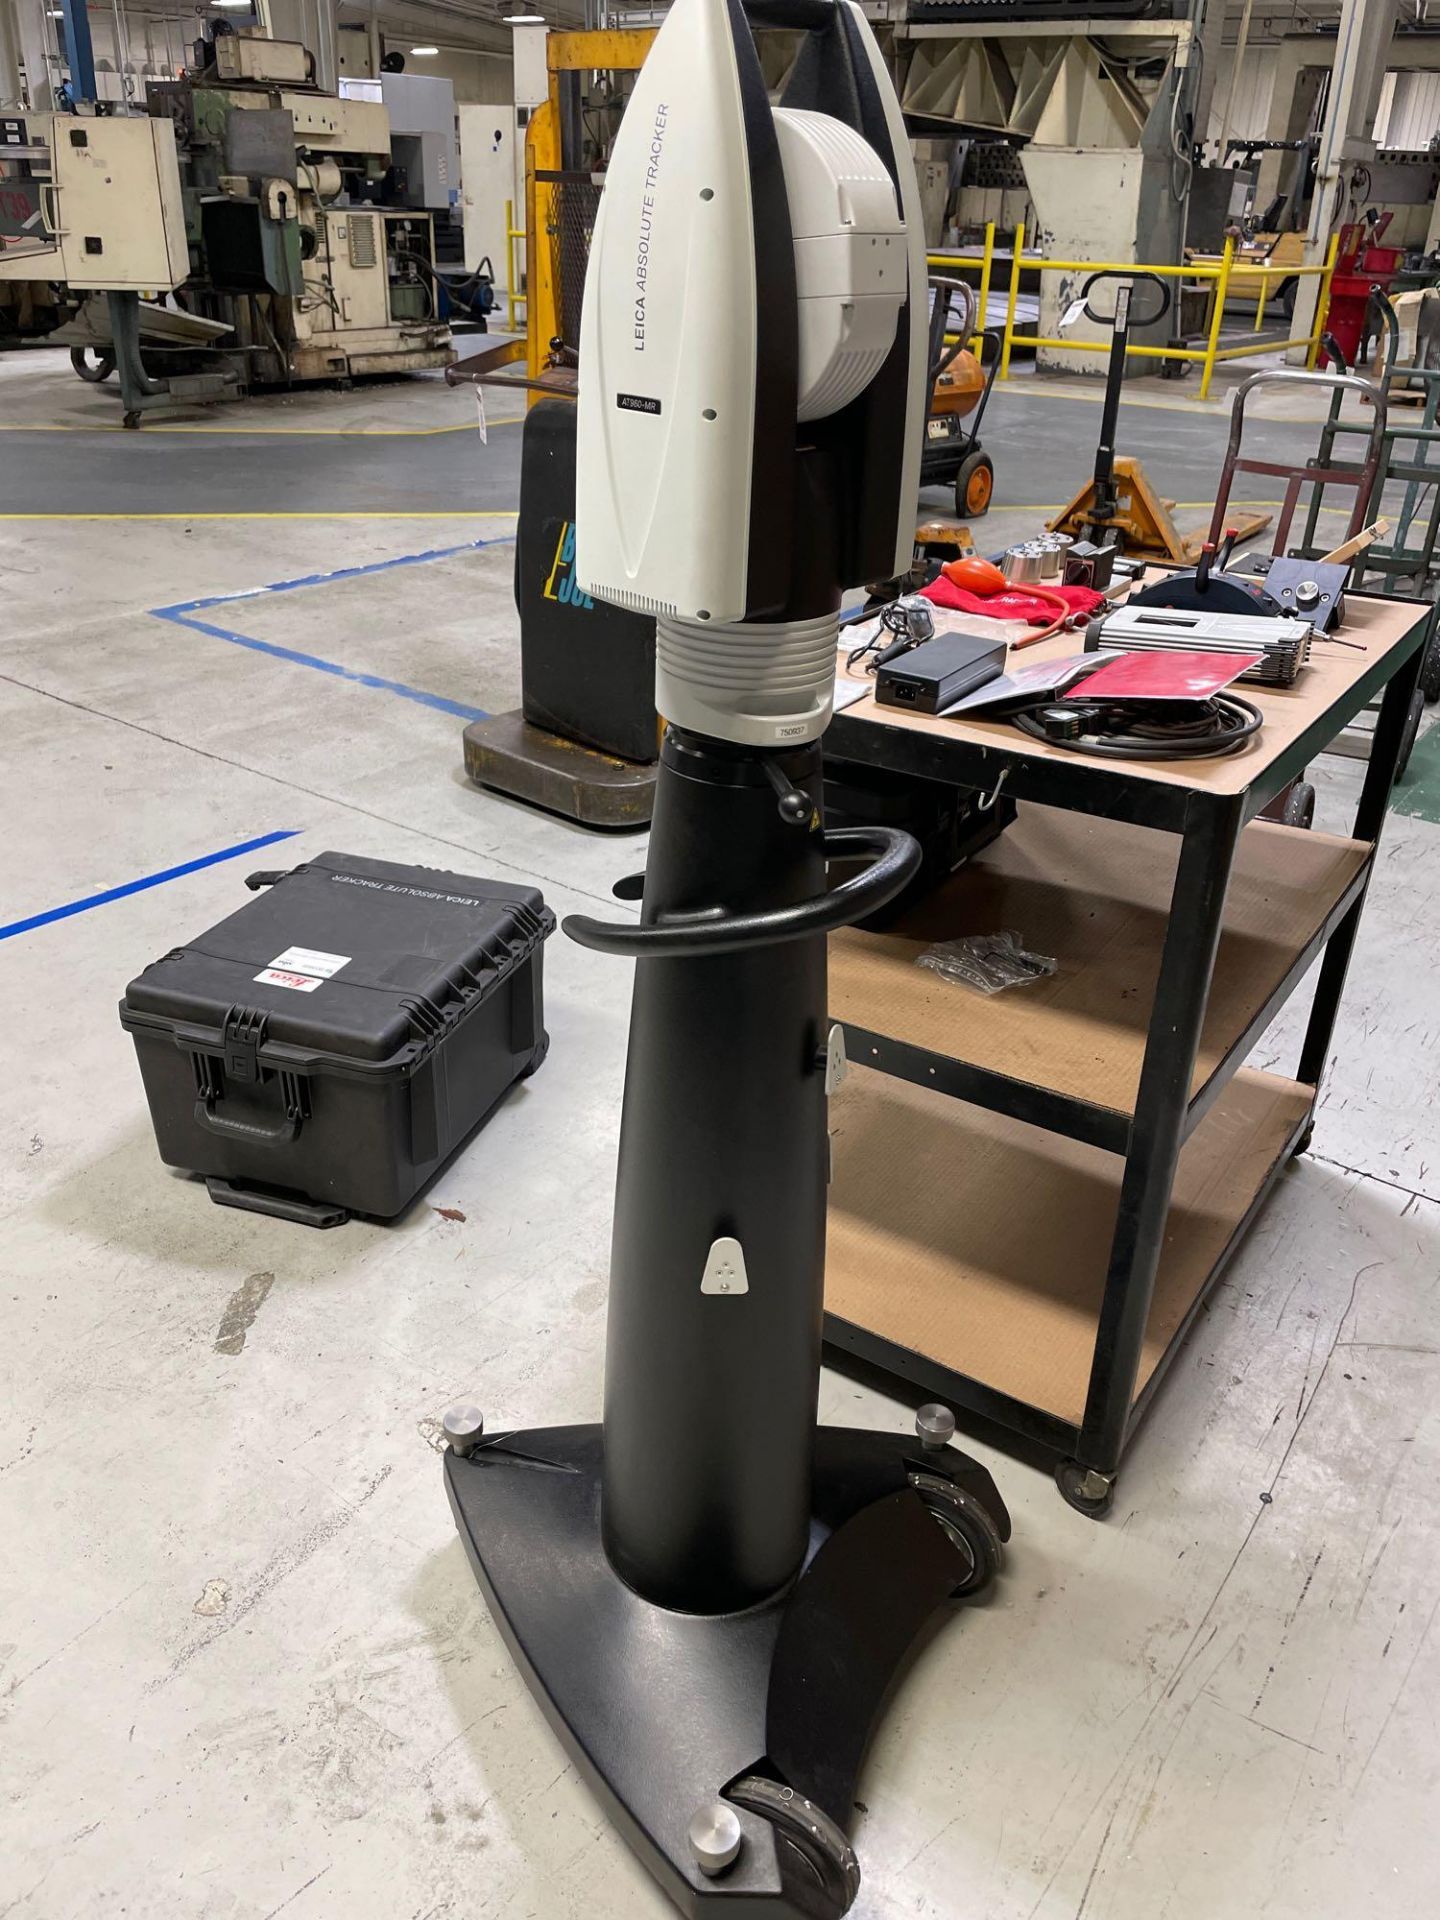 Leica Absolute Tracker AT960-MR Portable CMM, New 2017 Delivered 2019 - Image 2 of 13